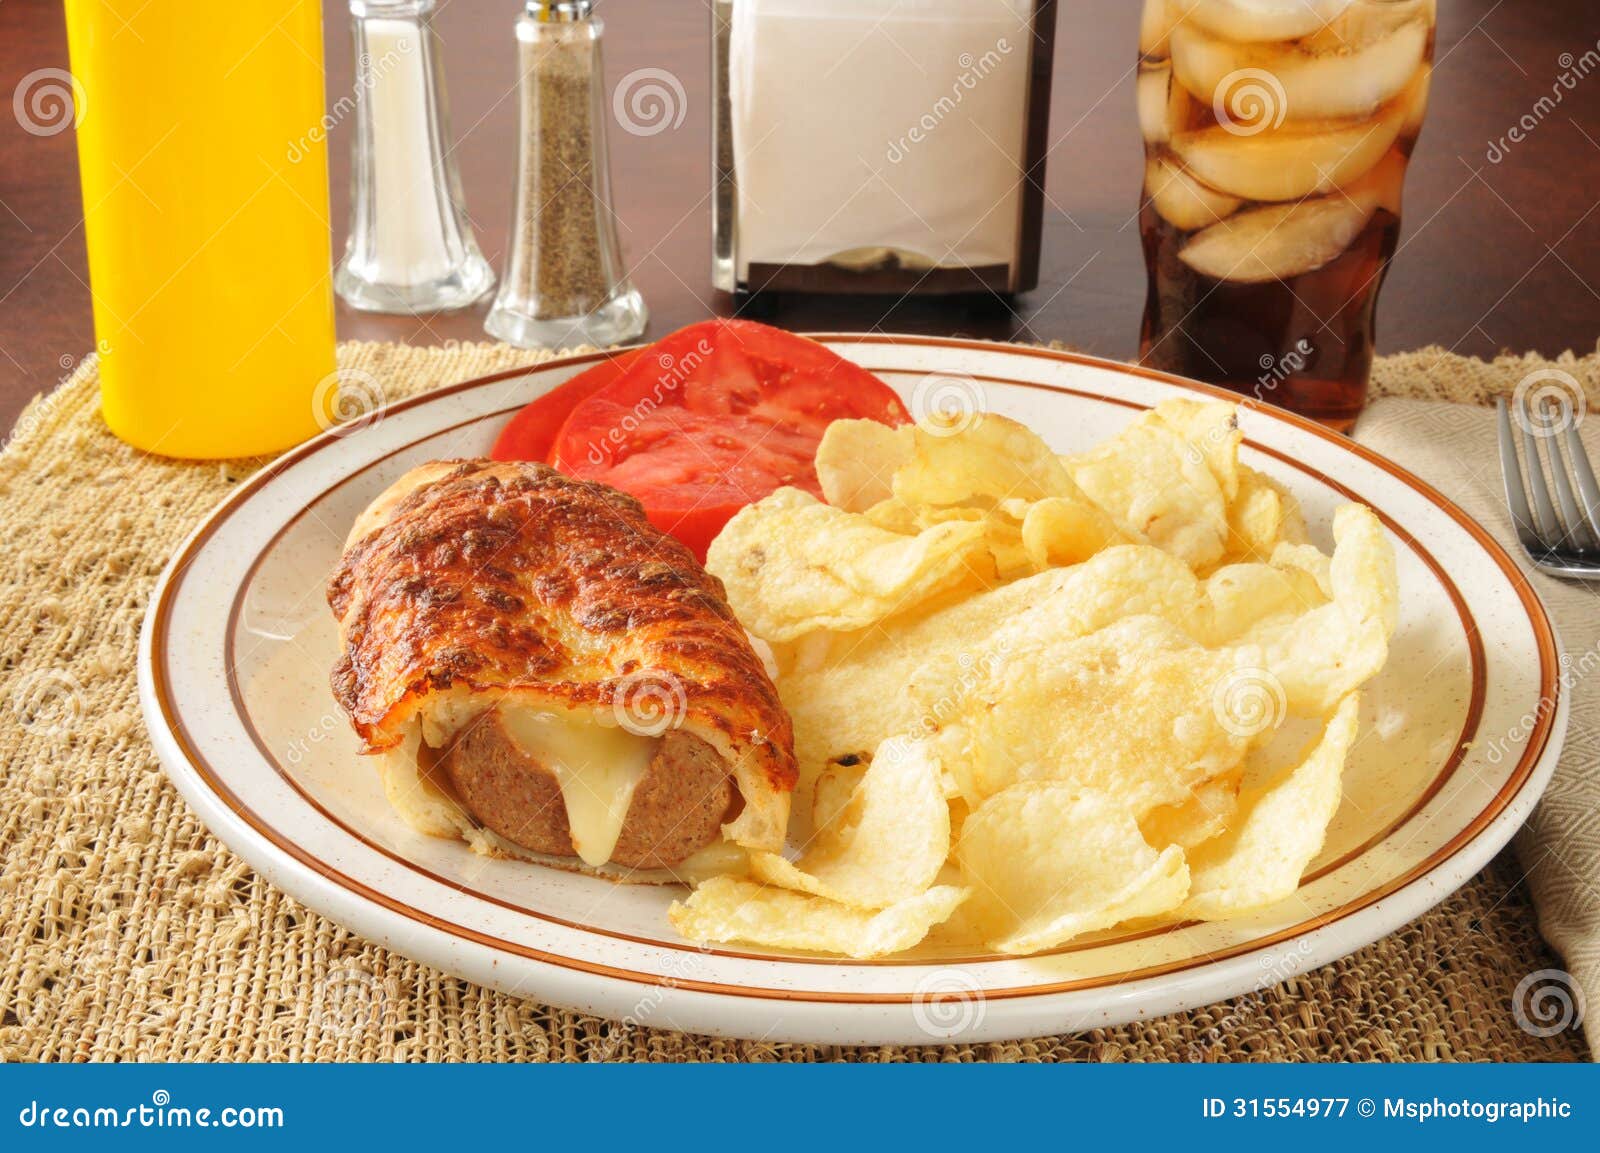 Hot dog in pastry stock image. Image of pastry, cola - 31554977